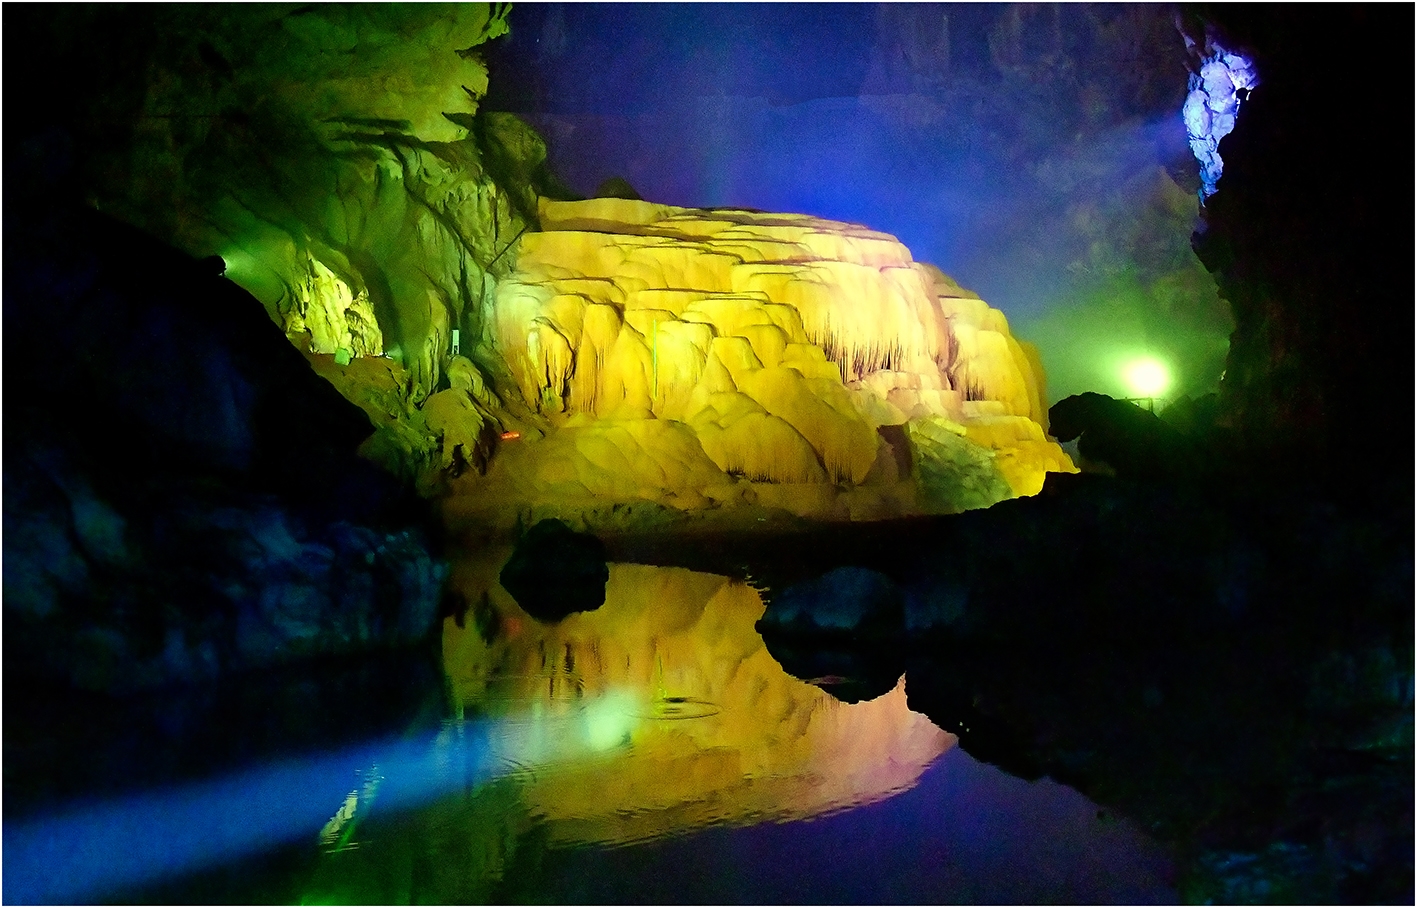 Nguom Ngao Cave in Cao Bang Province